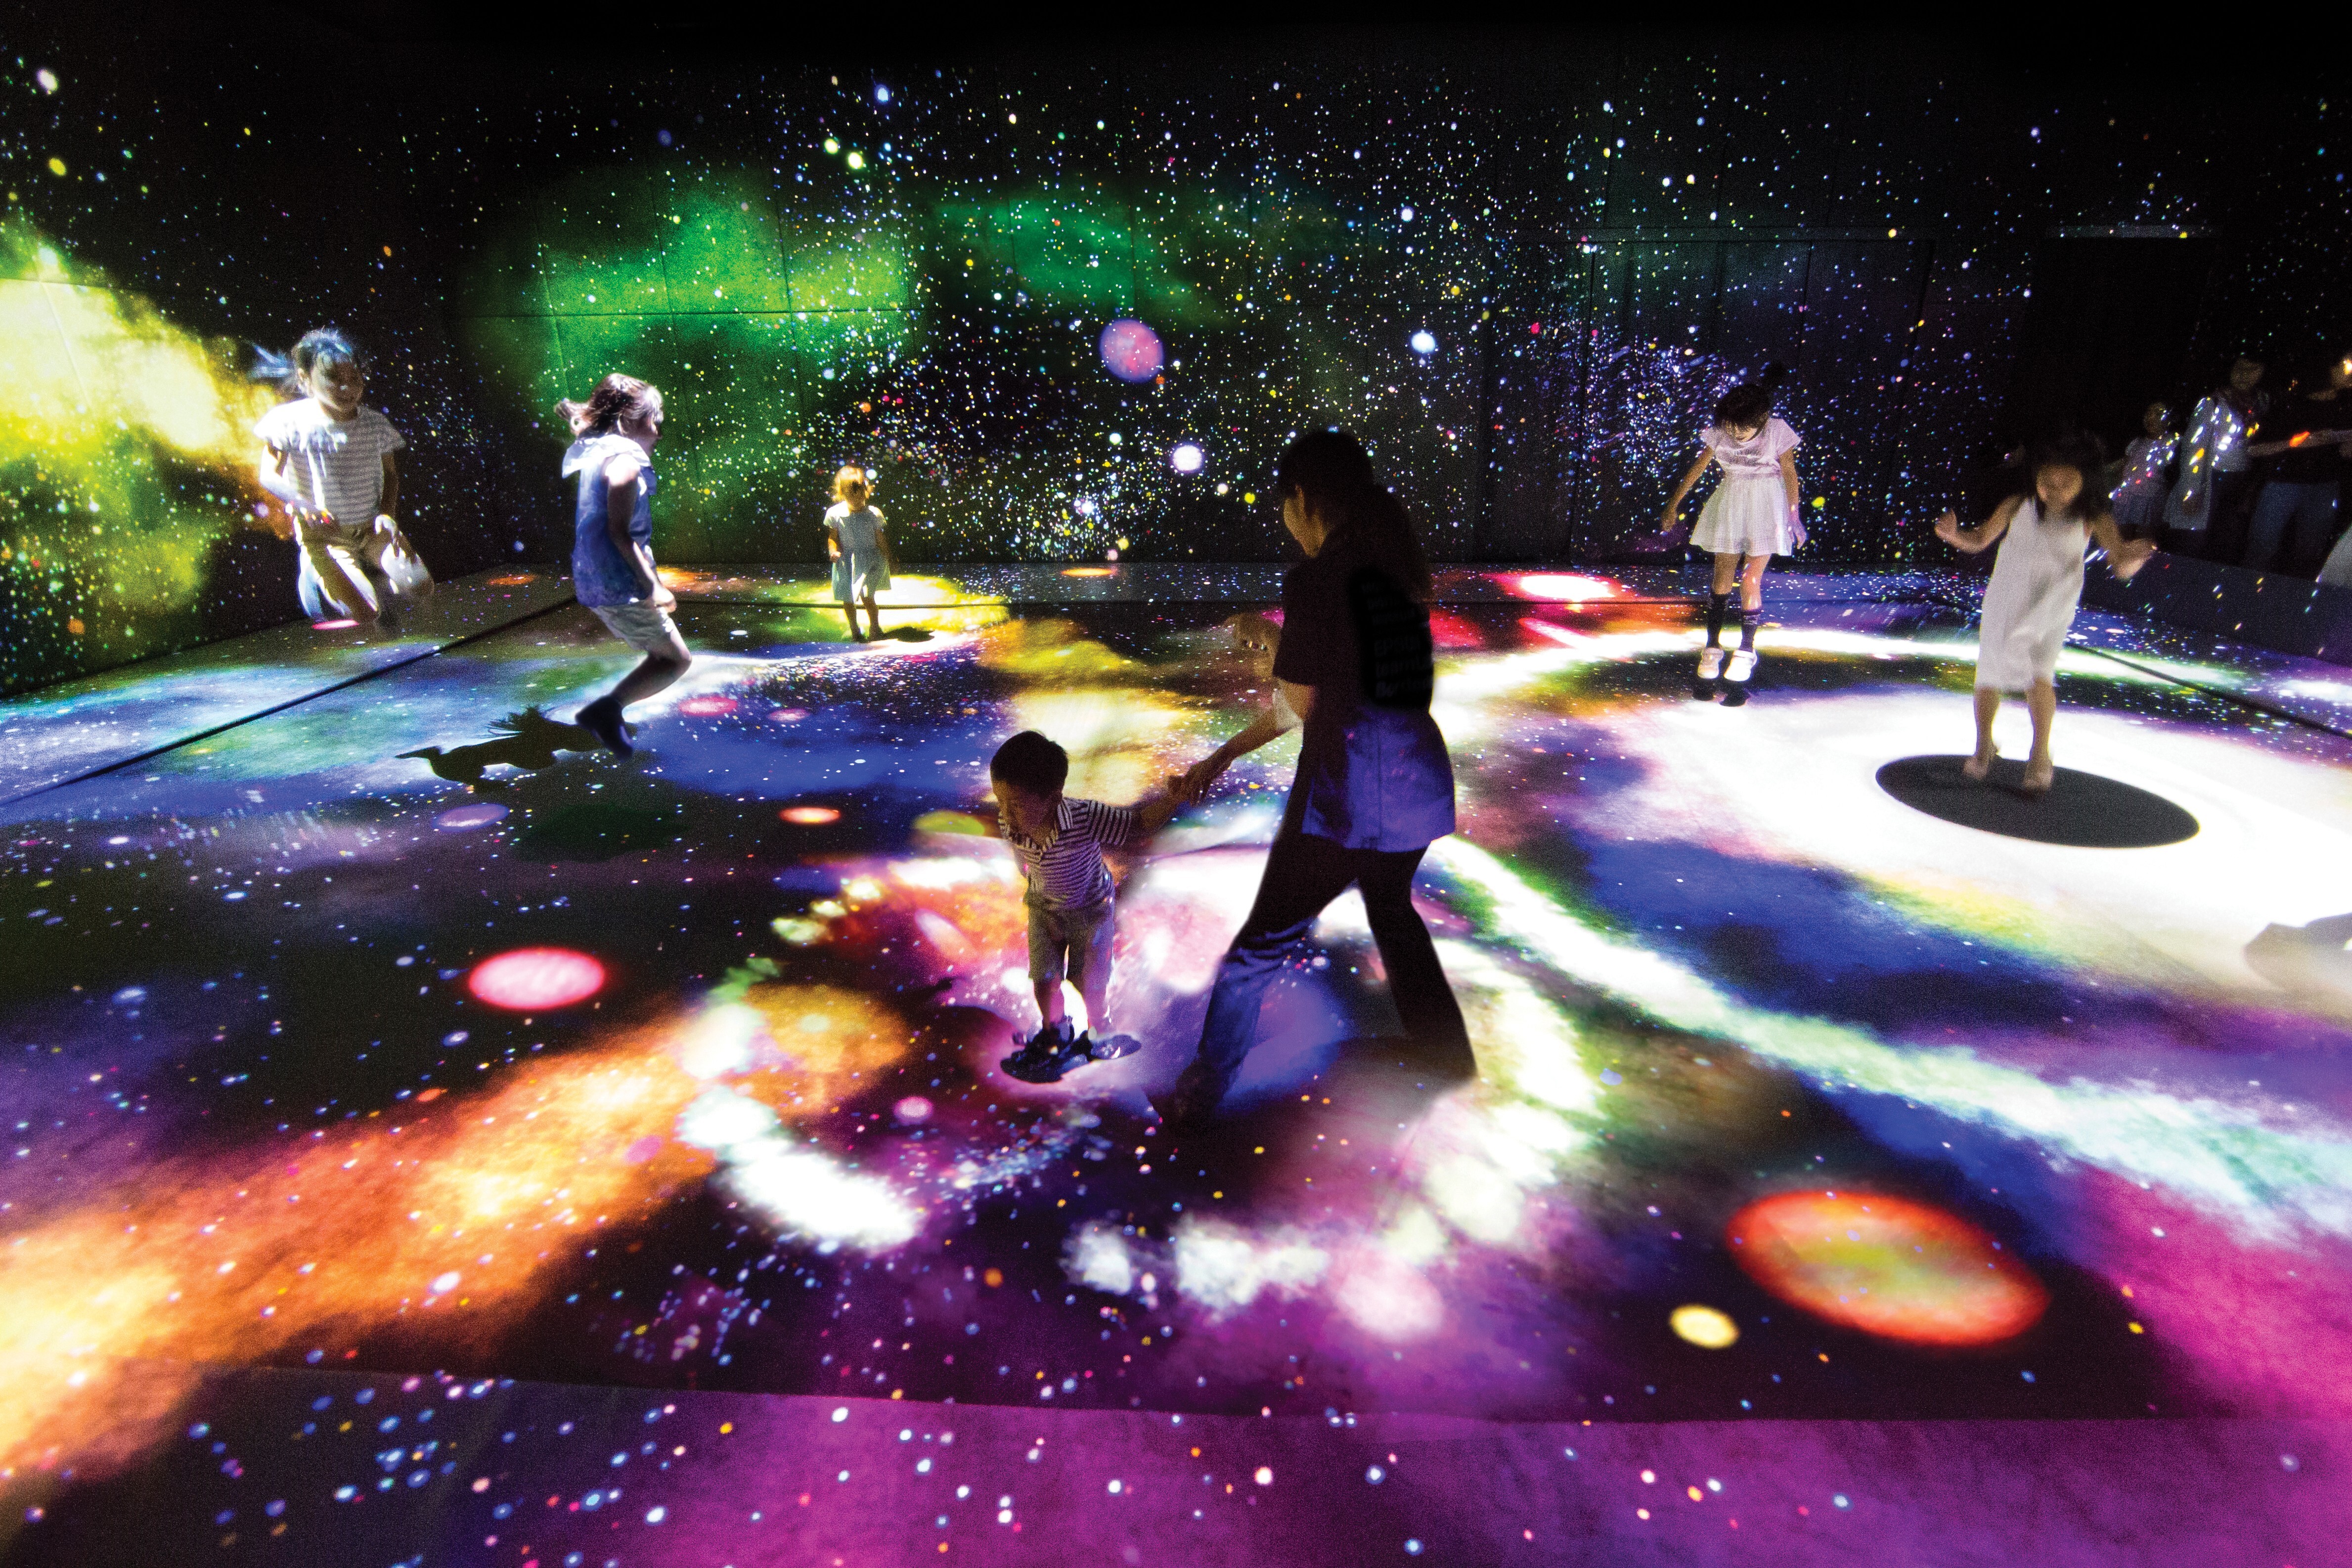 Multi Jumping Universe, one of the interactive digital installations created by teamLab Photo: teamLab